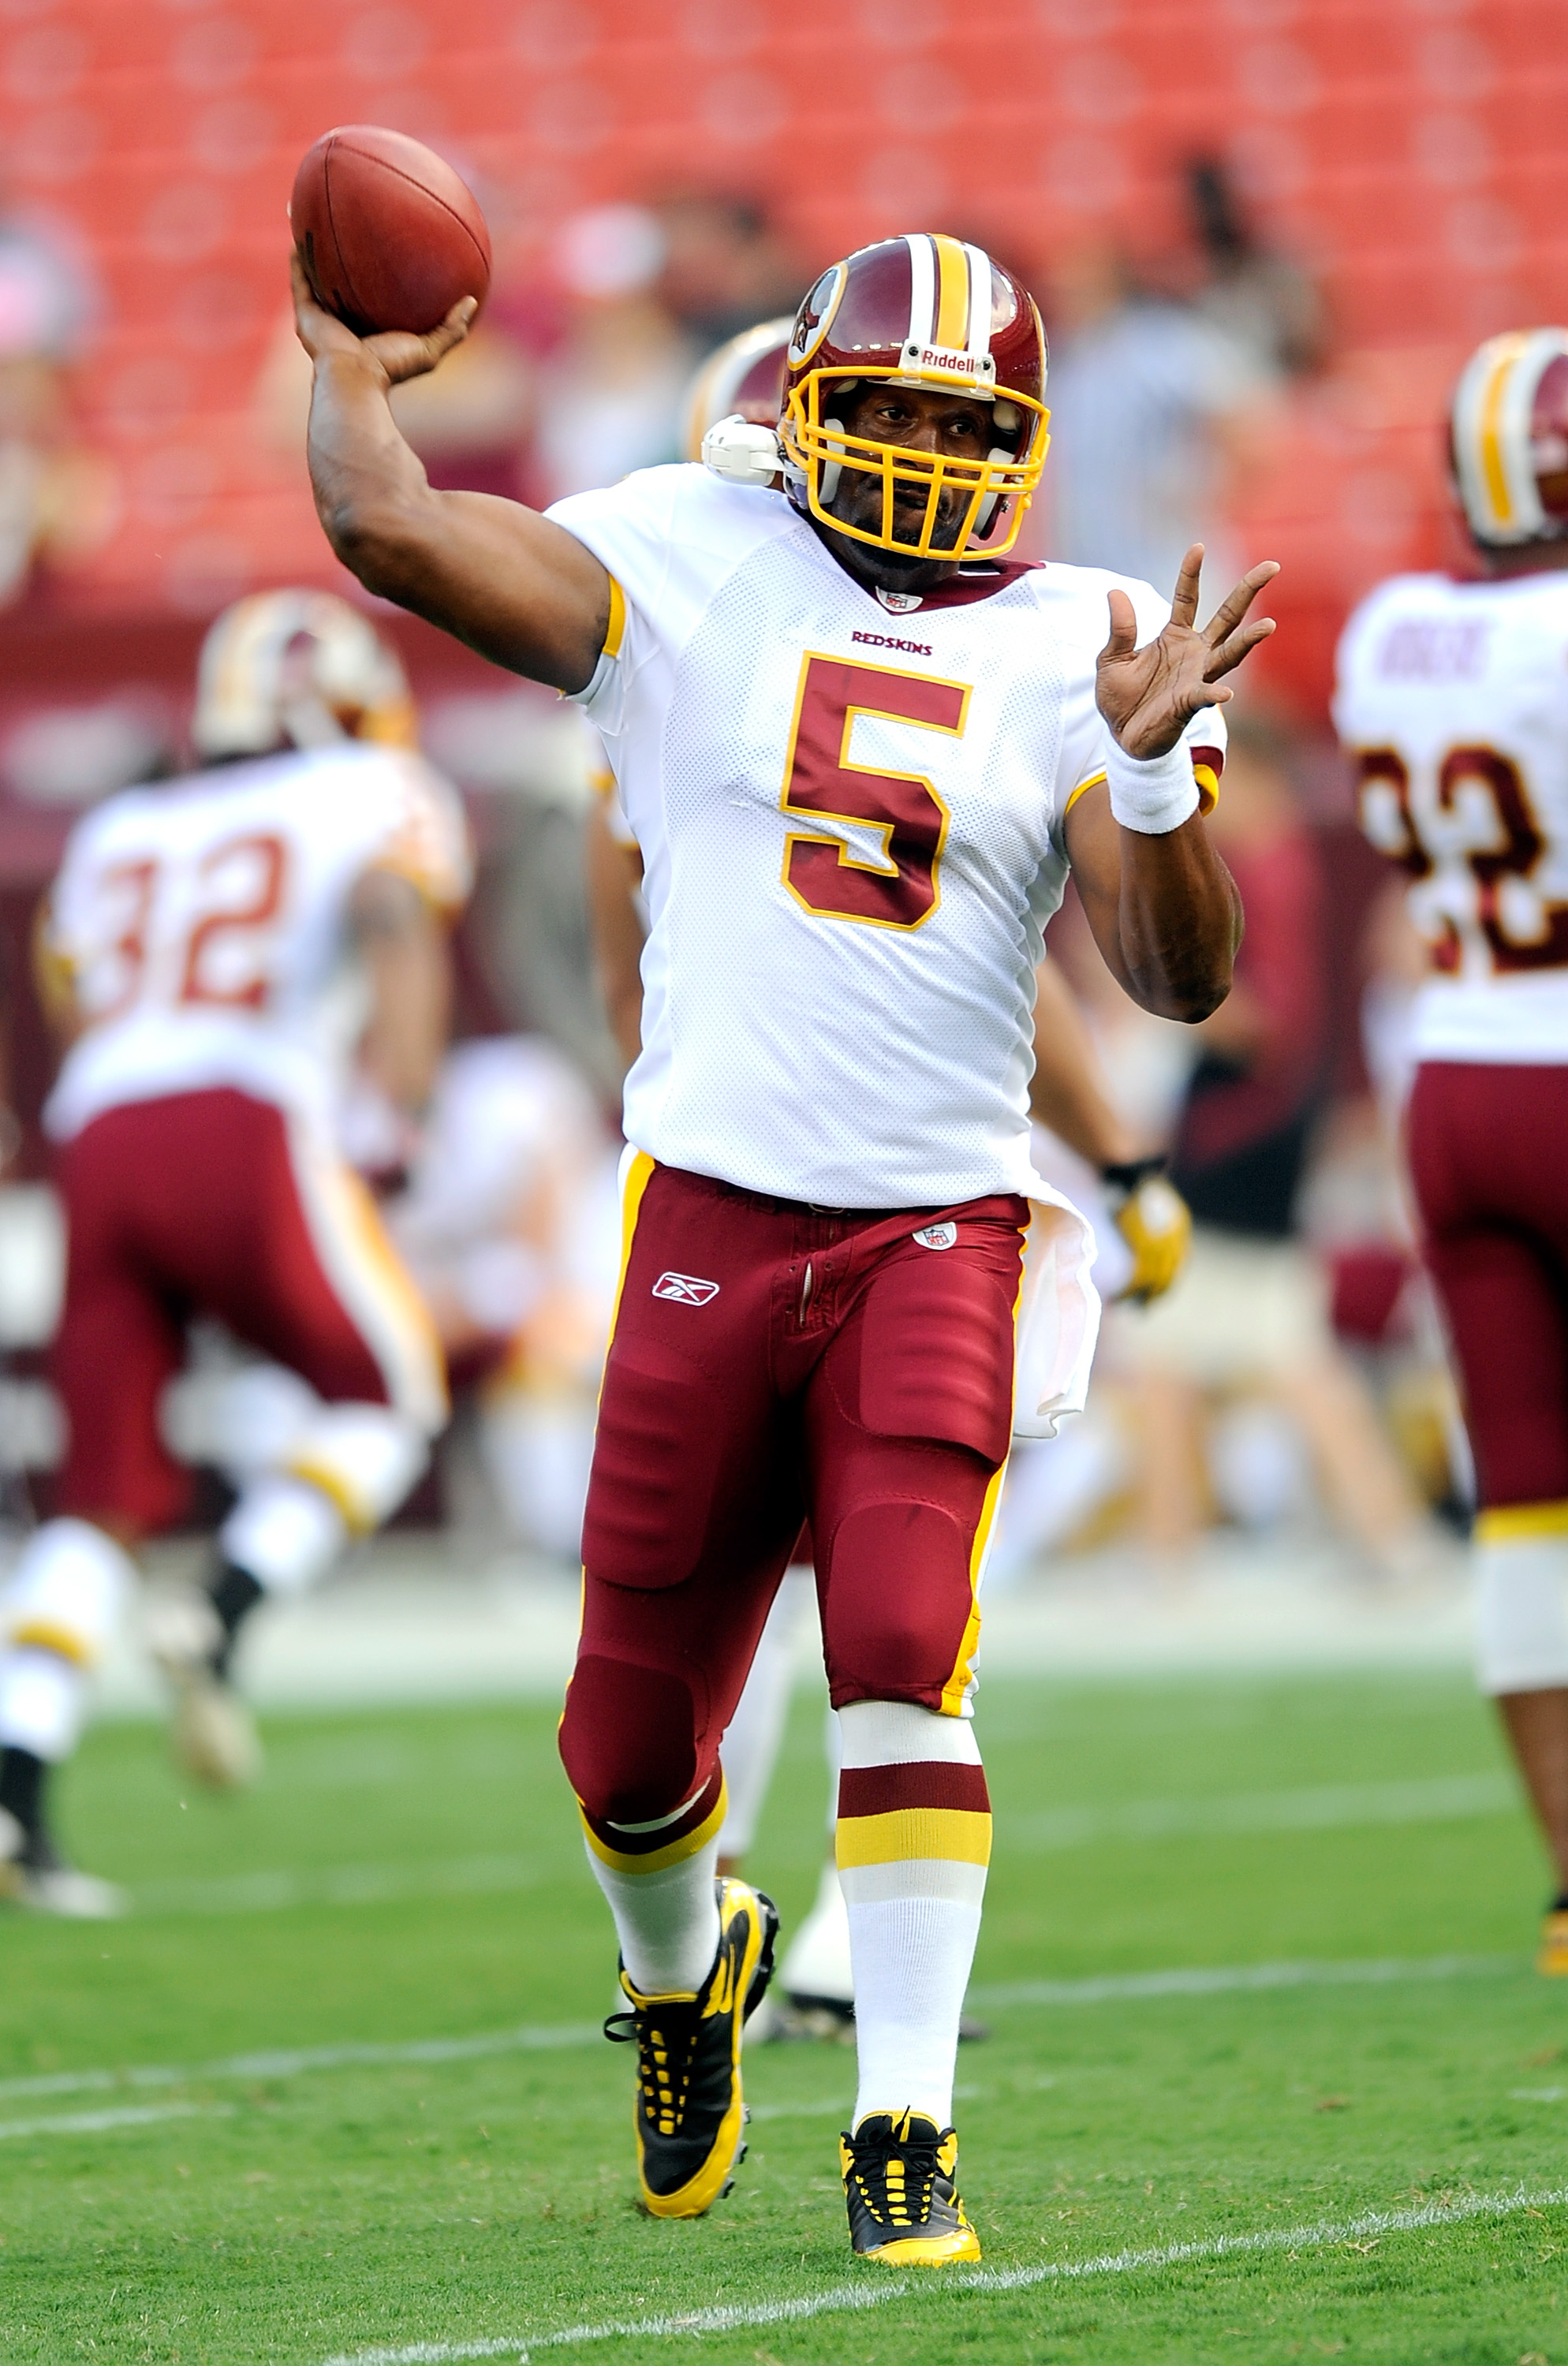 LANDOVER, MD - AUGUST 21:  Donovan McNabb #5 of the Washington Redskins warms up before the preseason game against the Baltimore Ravens at FedExField on August 21, 2010 in Landover, Maryland.  (Photo by Greg Fiume/Getty Images)